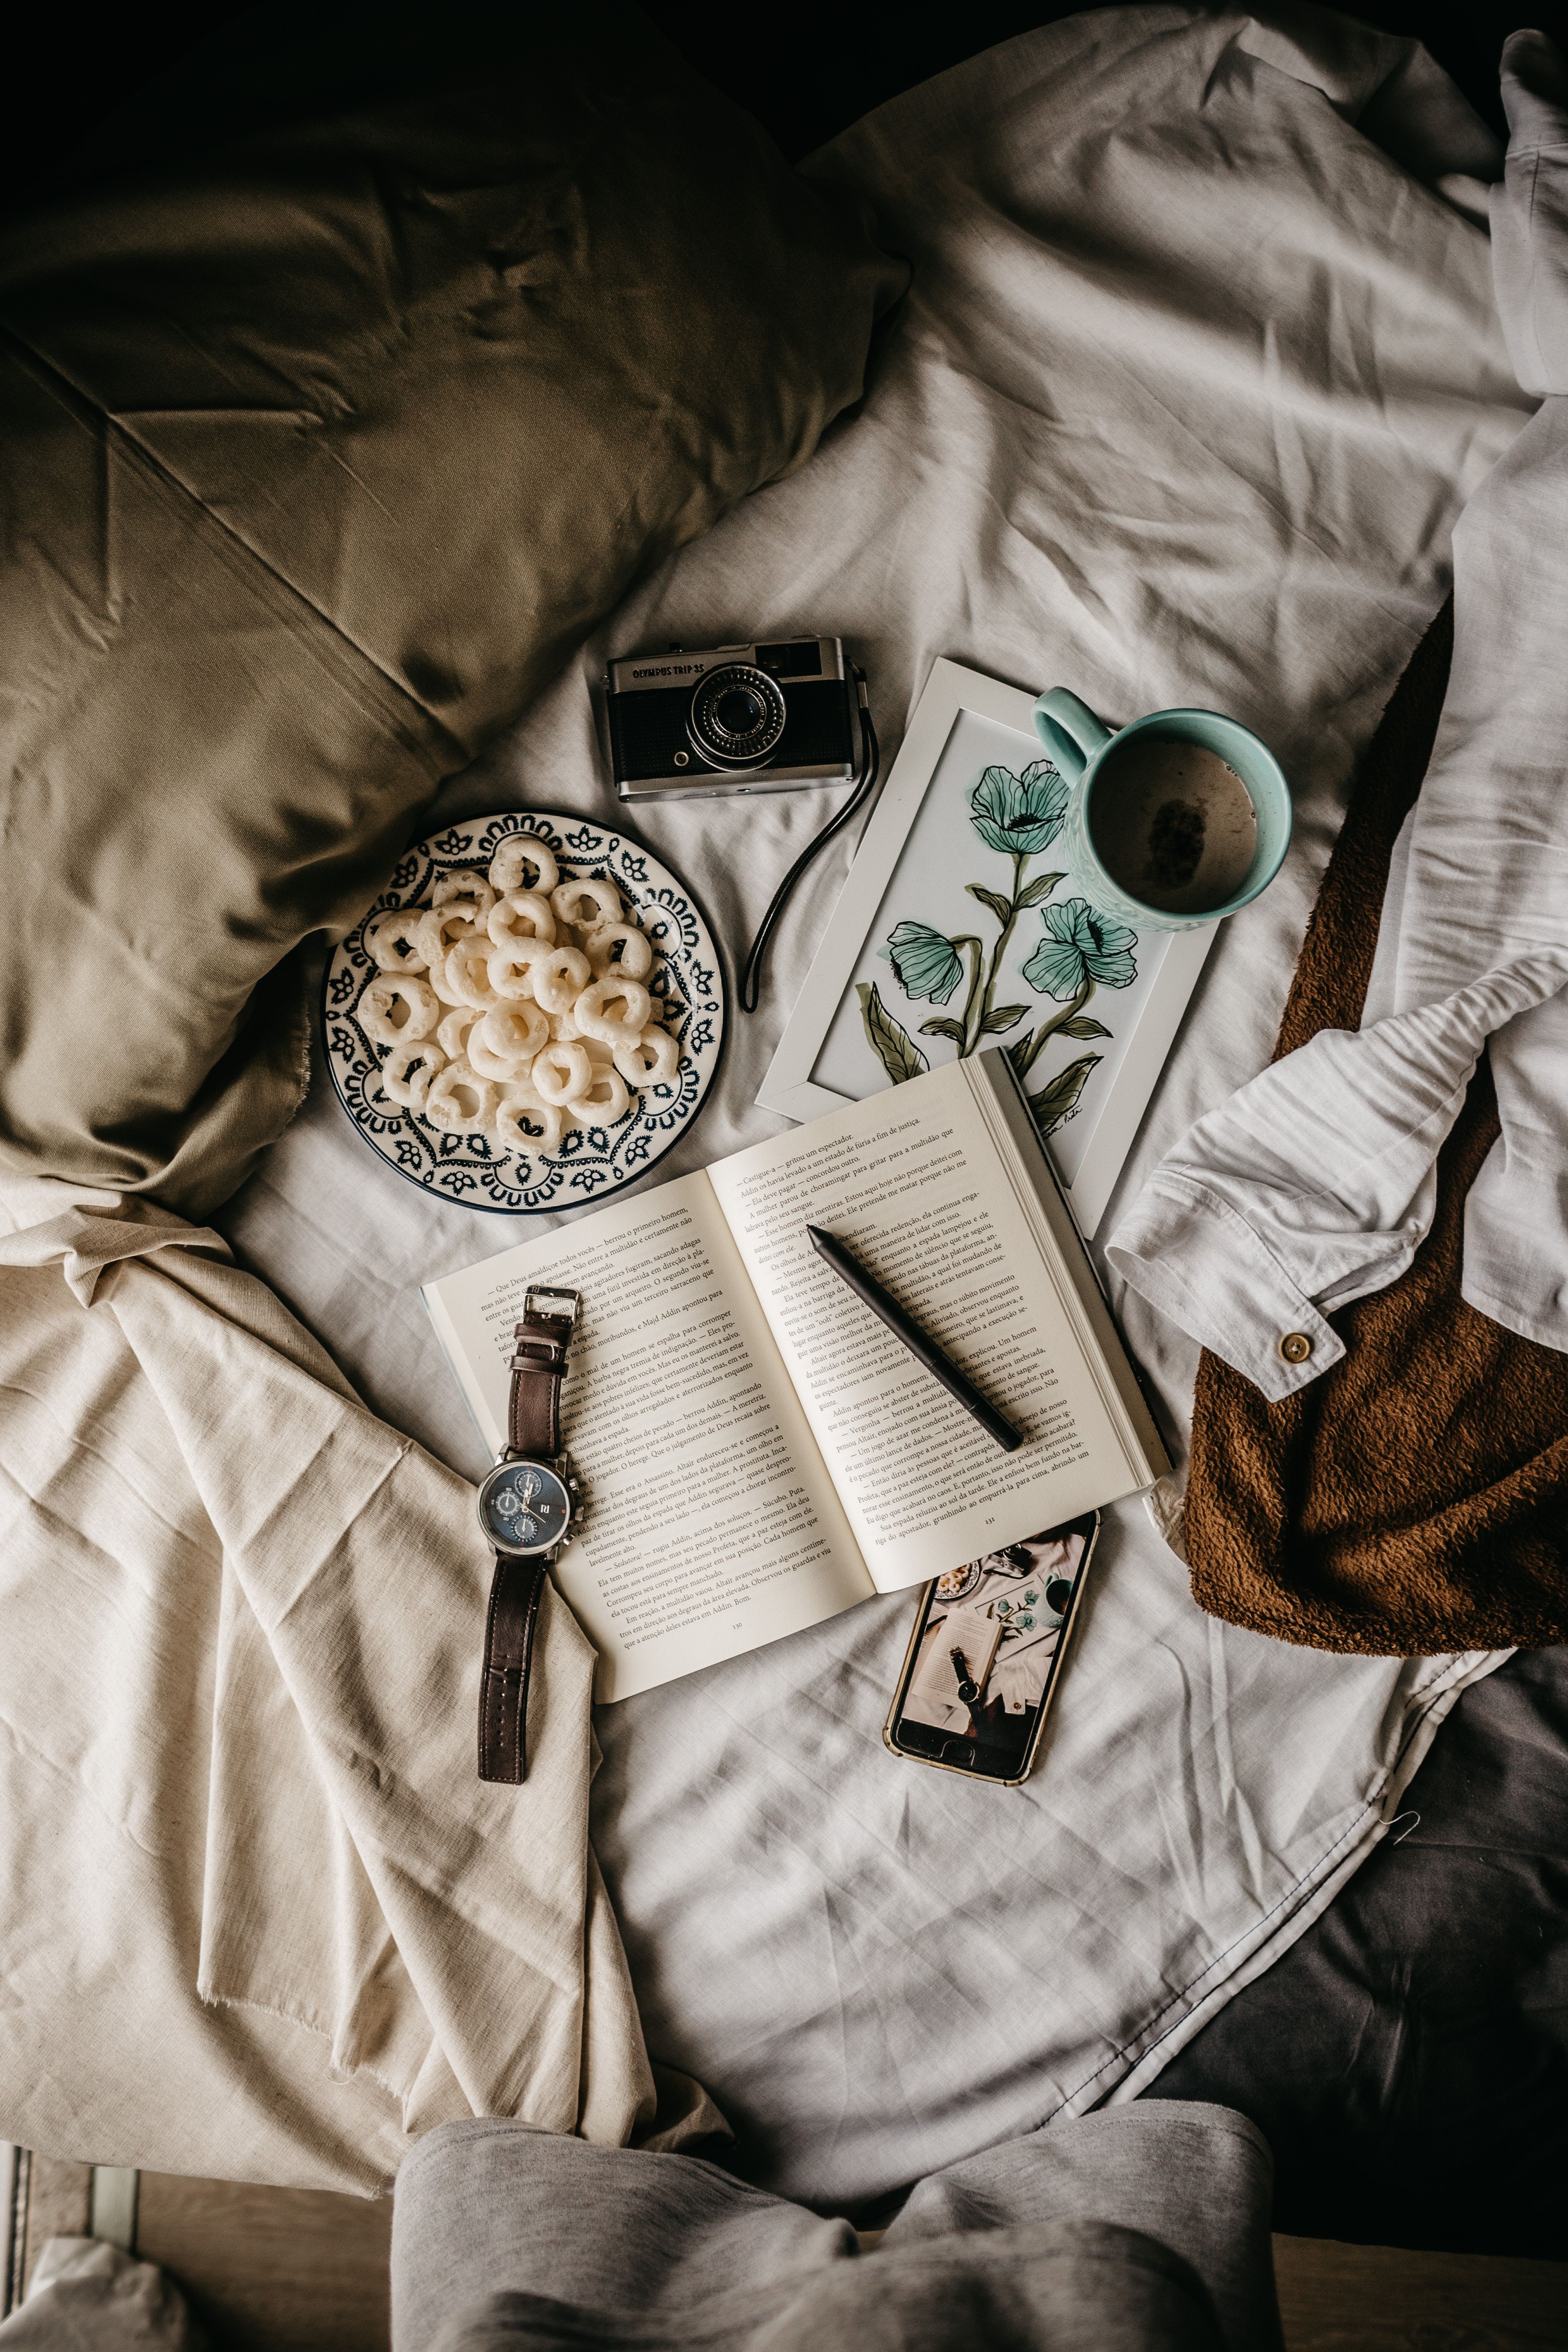 miscellanea, cup, camera, food, miscellaneous, book, bed, mood, mug, breakfast for android